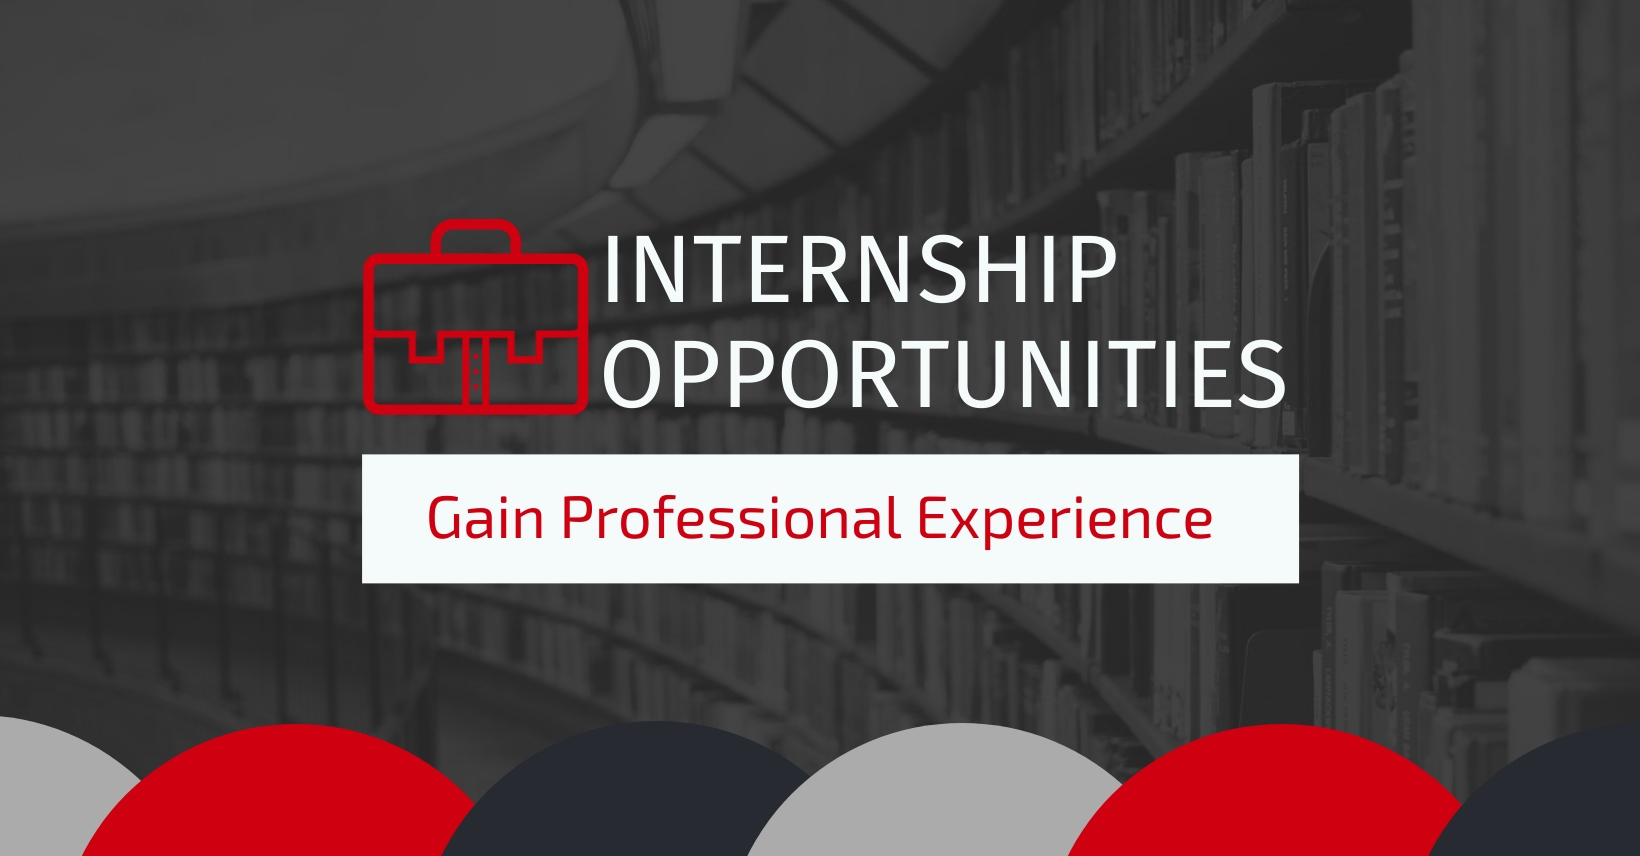 Check out these internship opportunities!